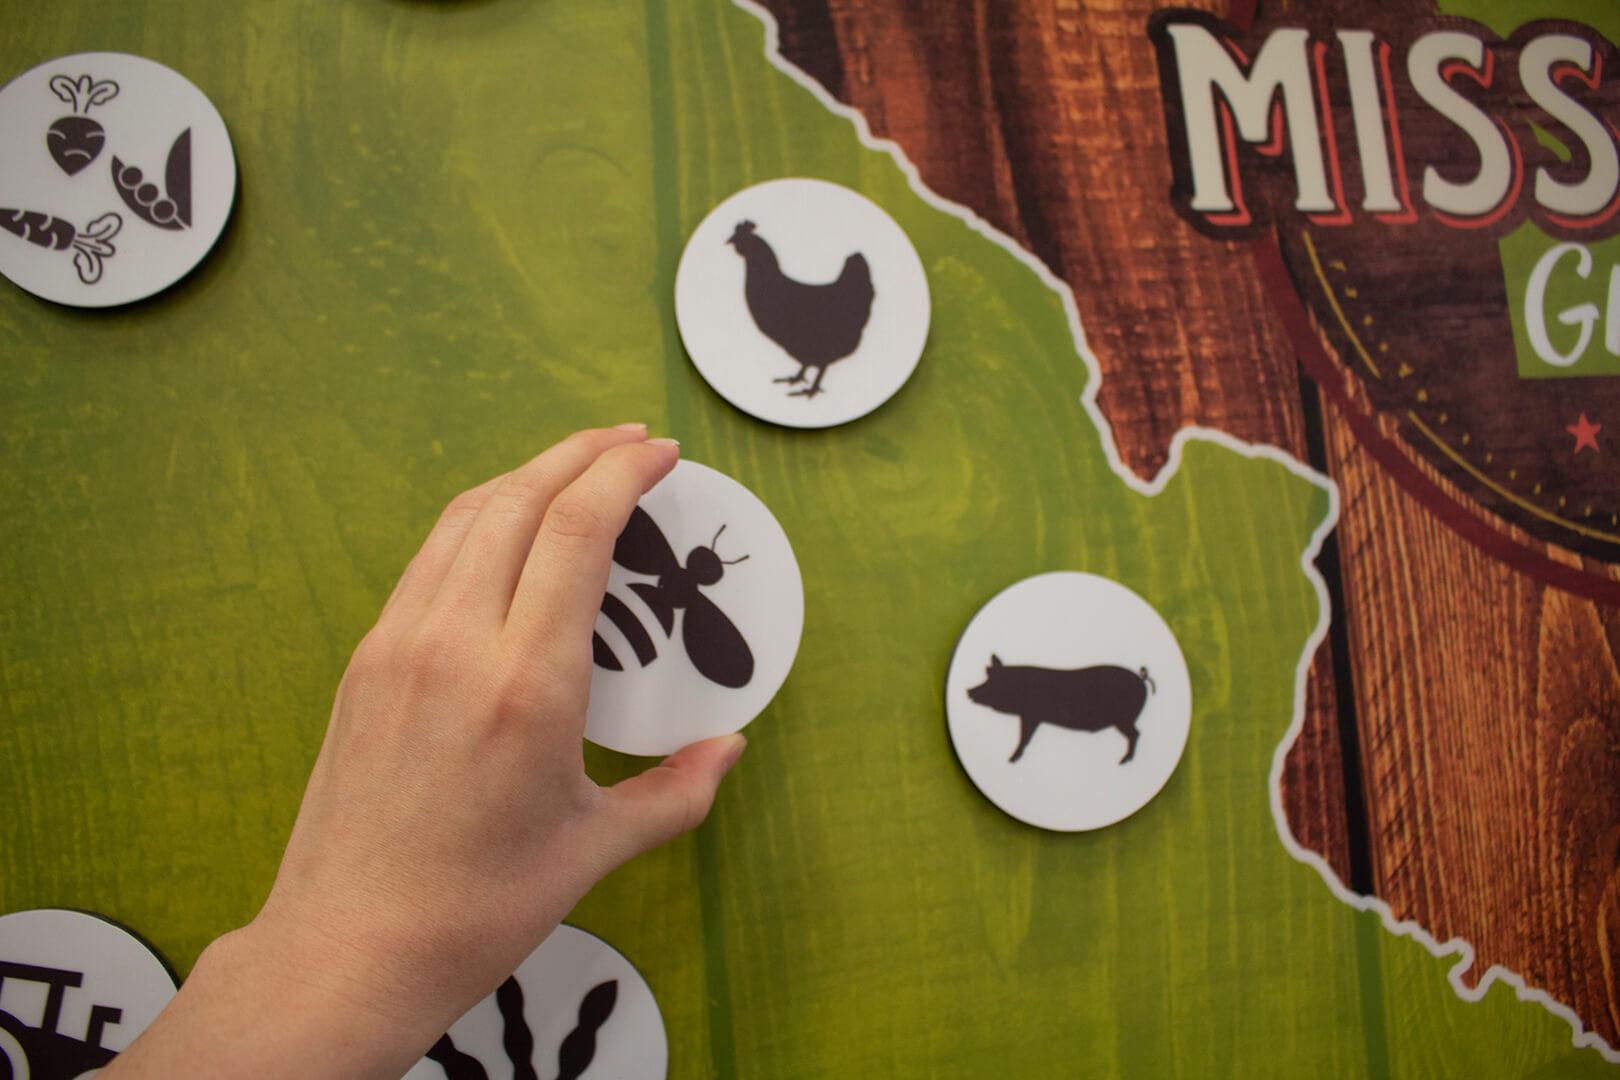 Photo showing someone placing a magnet on the map incorporated into the Agricultural Diversity Display